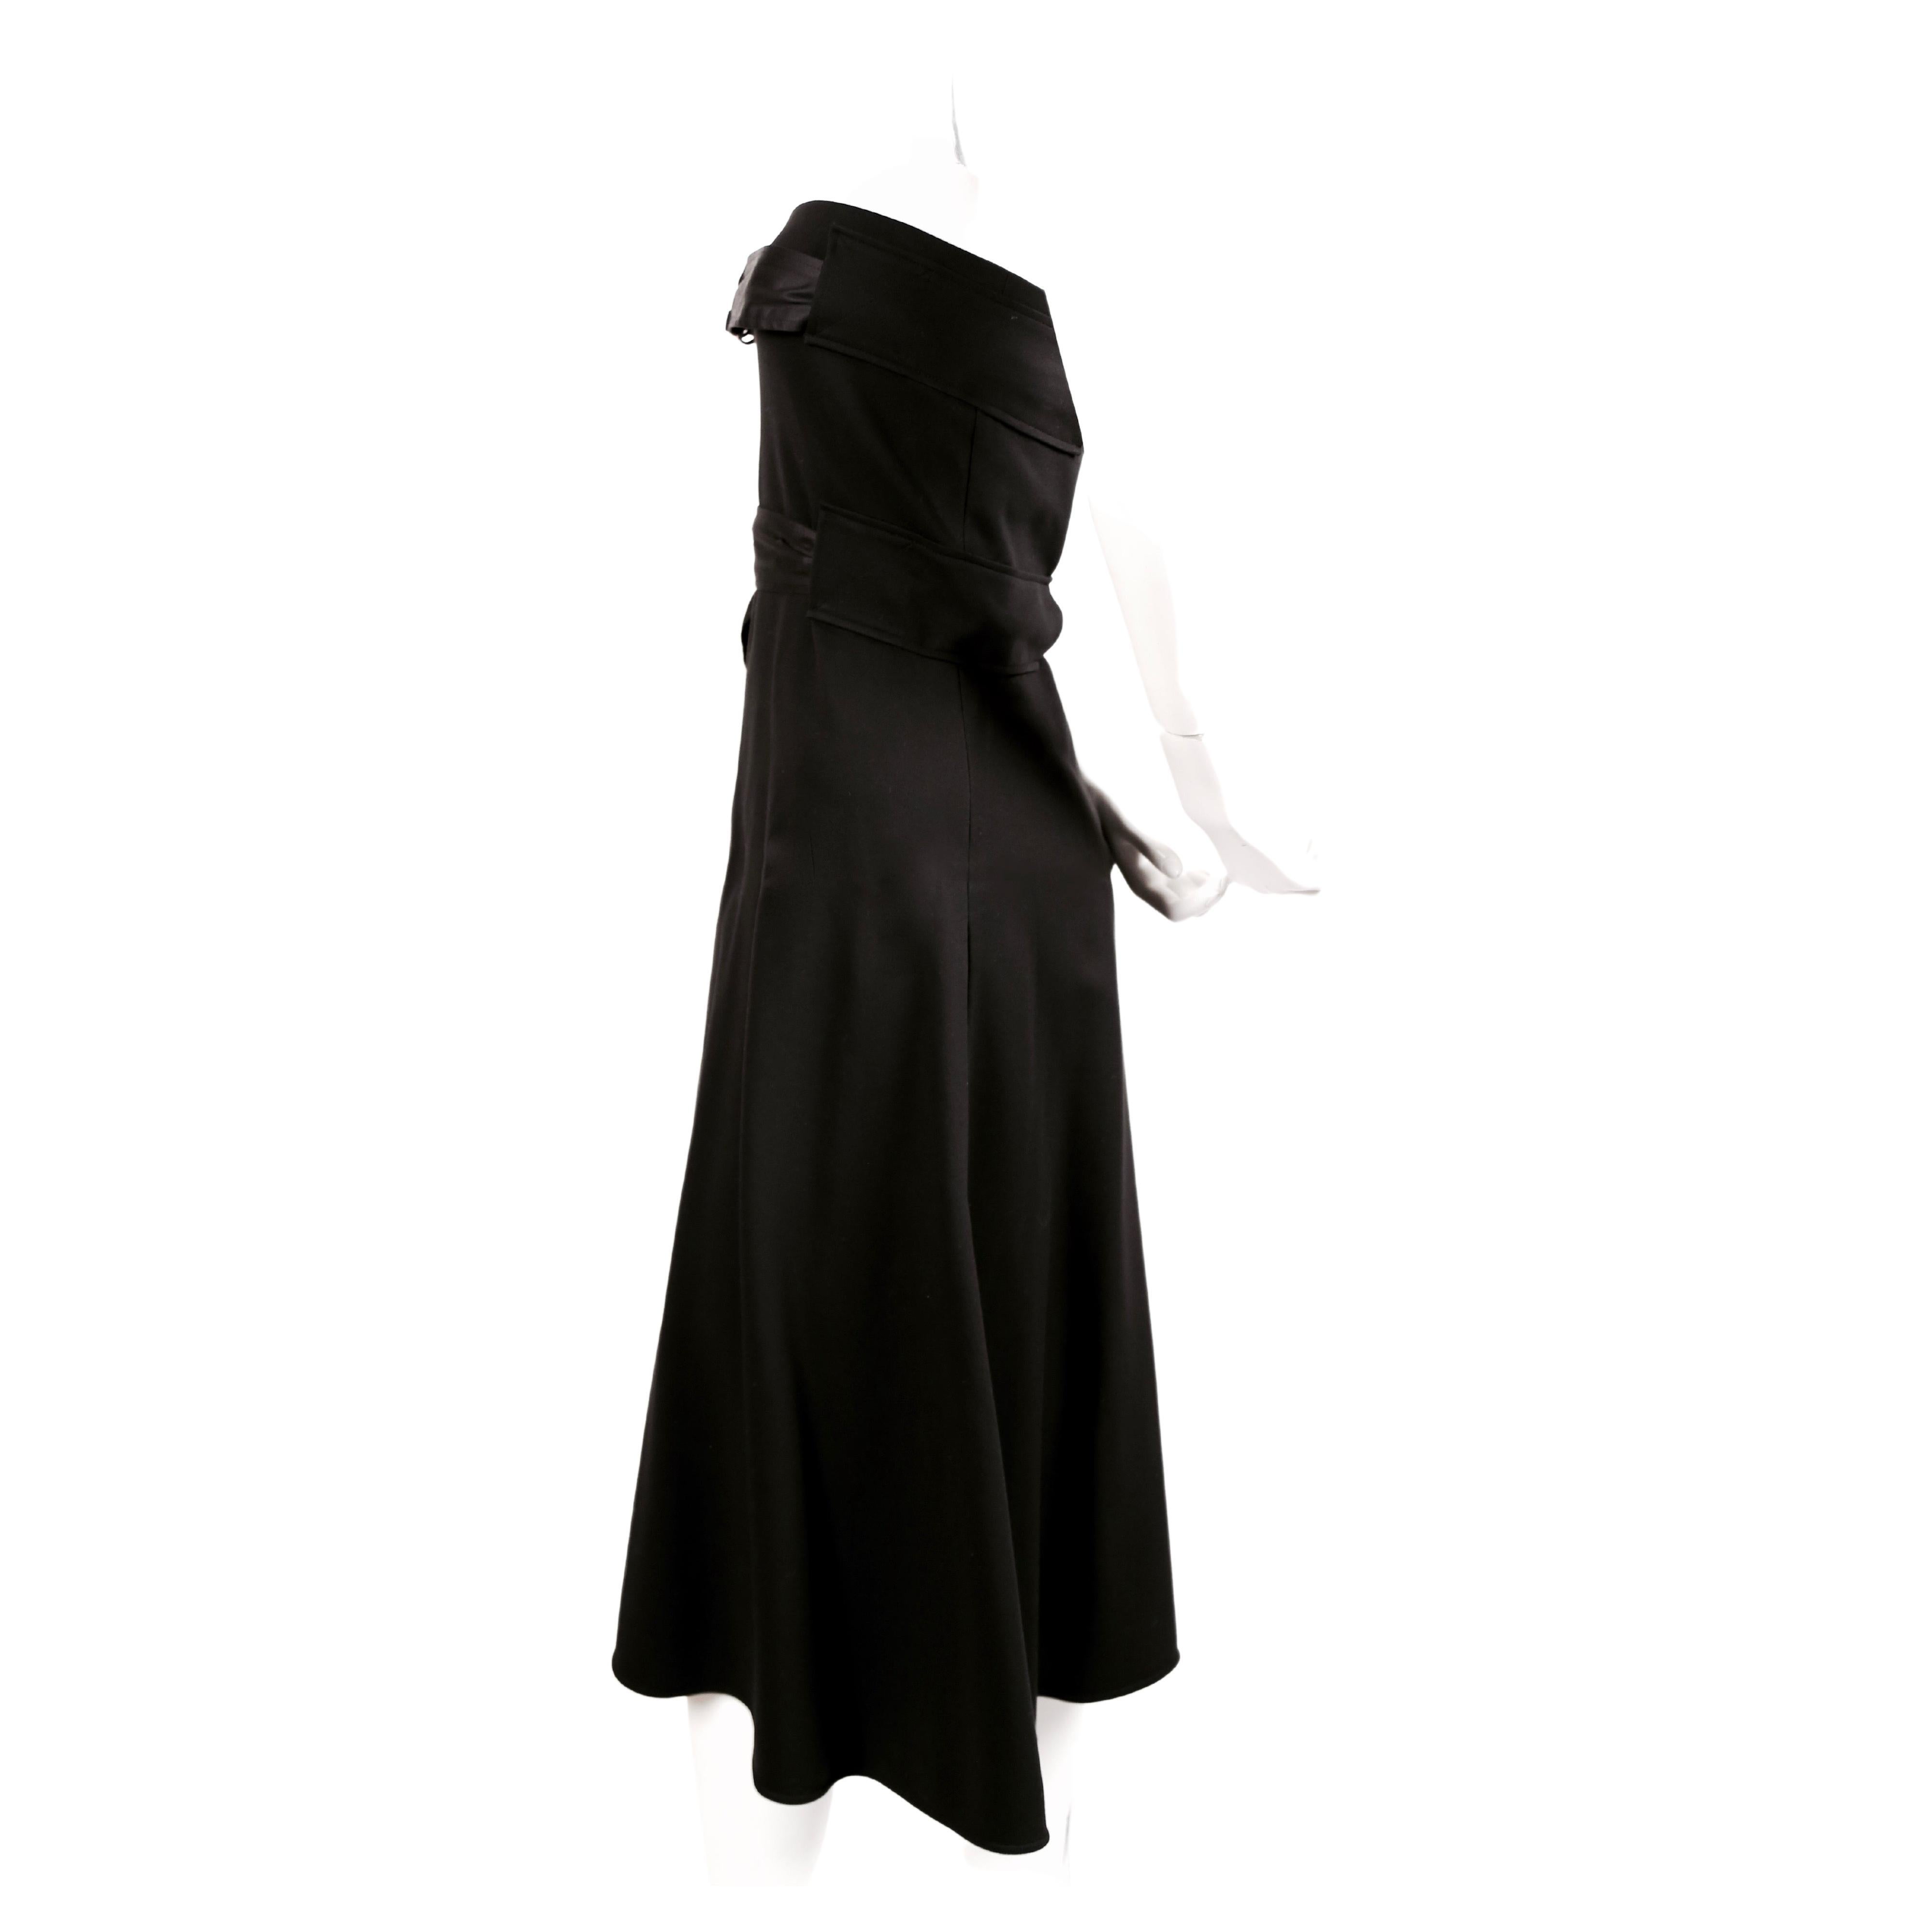 Jet-black, belted, strapless dress with silver hardware designed by Phoebe Philo for Celine dating to resort of 2014. Belts at bust and waist. Can be dressed up or down.  Labeled a French size 36. Approximate measurements: bust 28